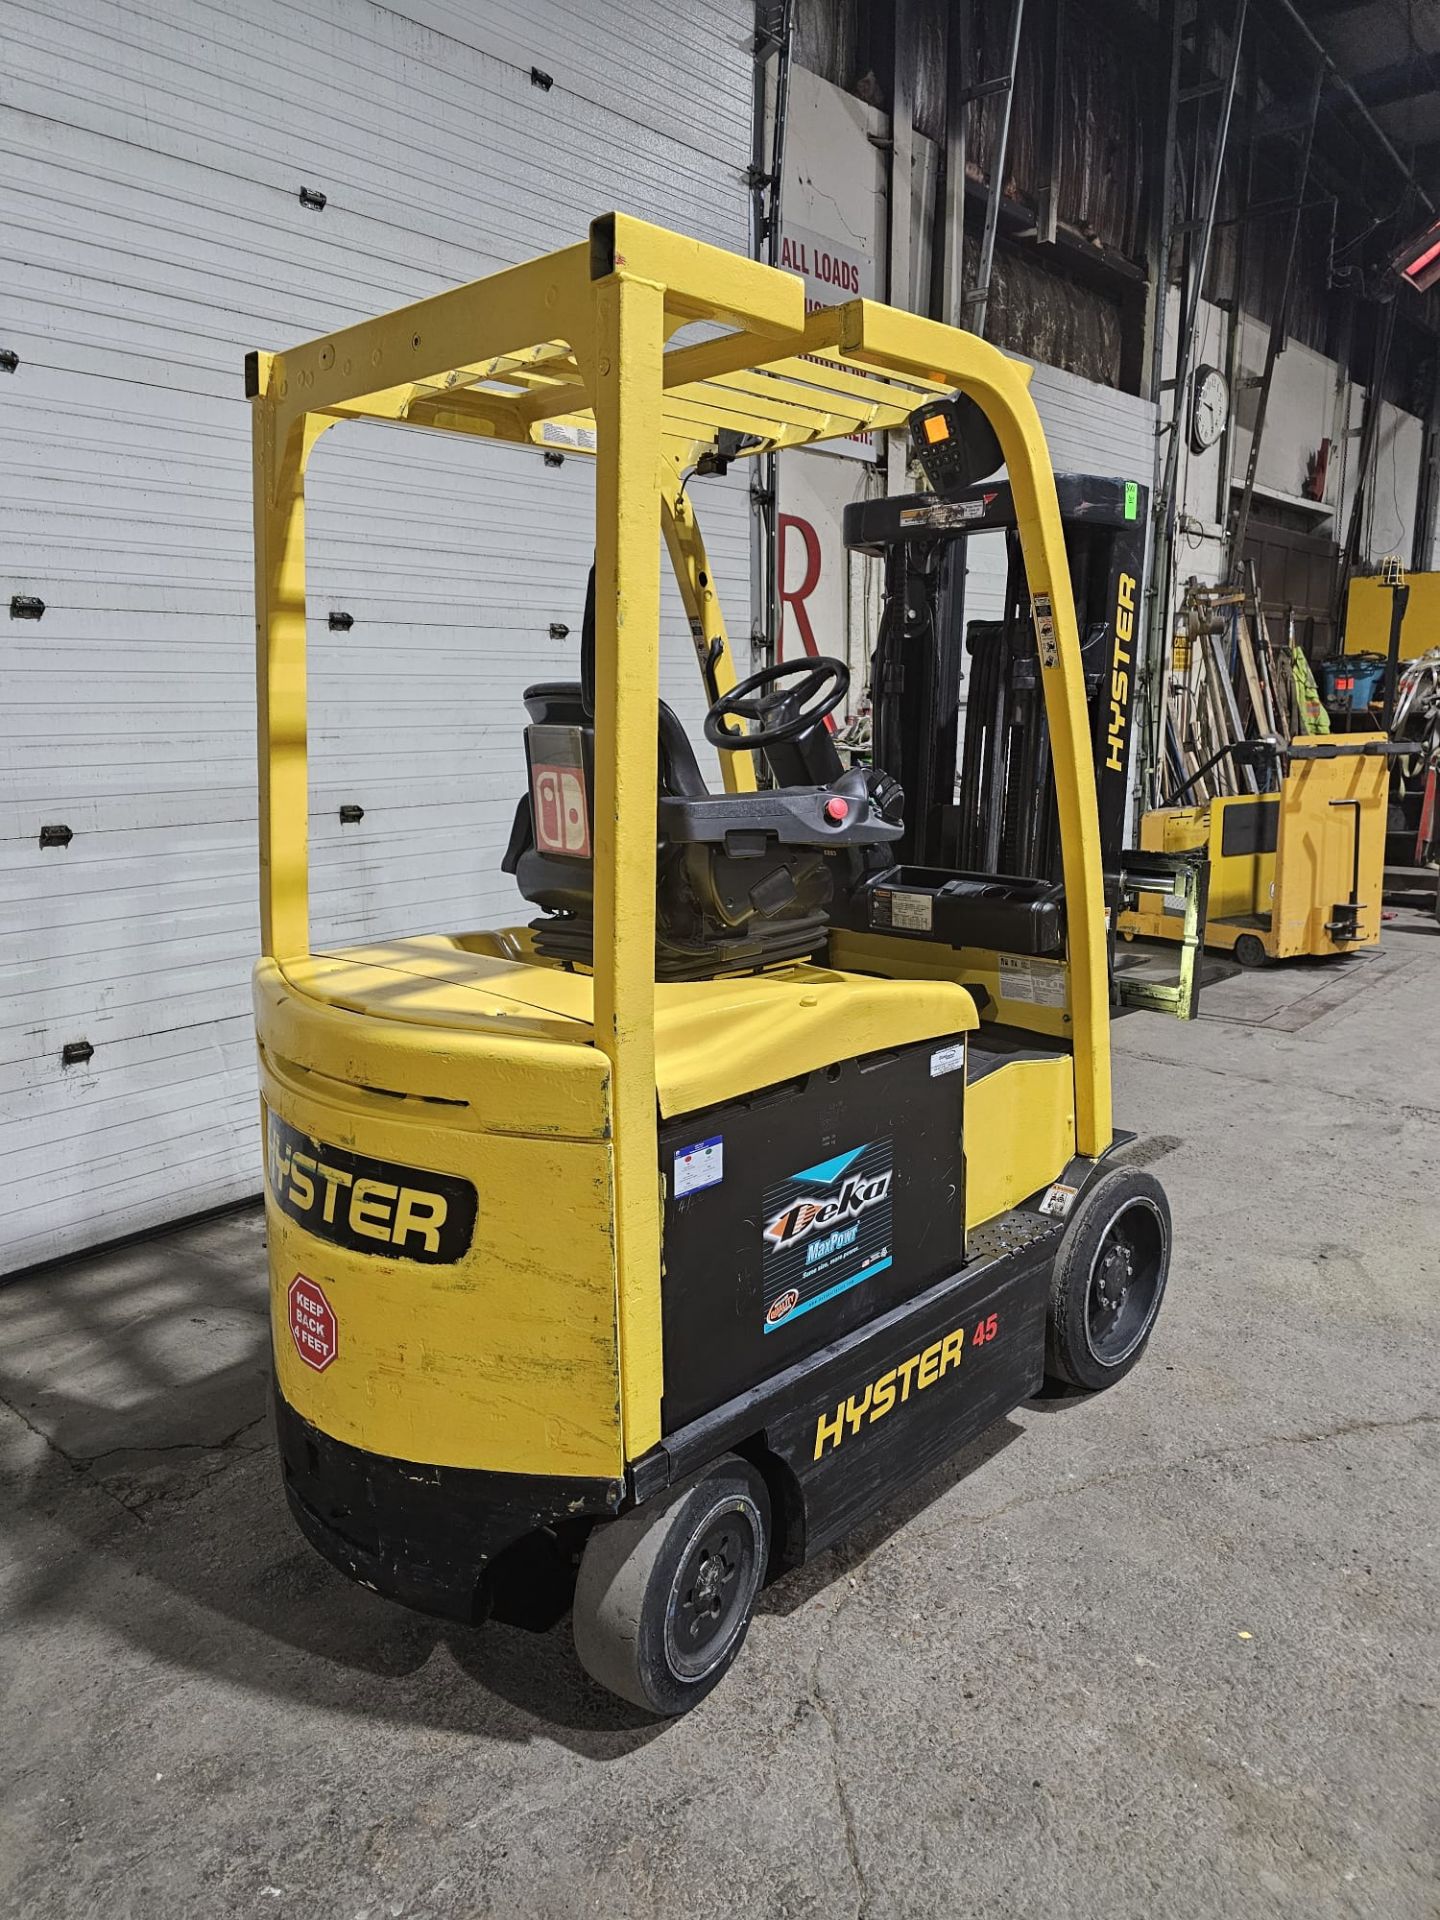 2017 Hyster 4,500lbs Capacity Forklift Electric 48V with sideshift & 3-STAGE MAST 187" load height - Image 4 of 7